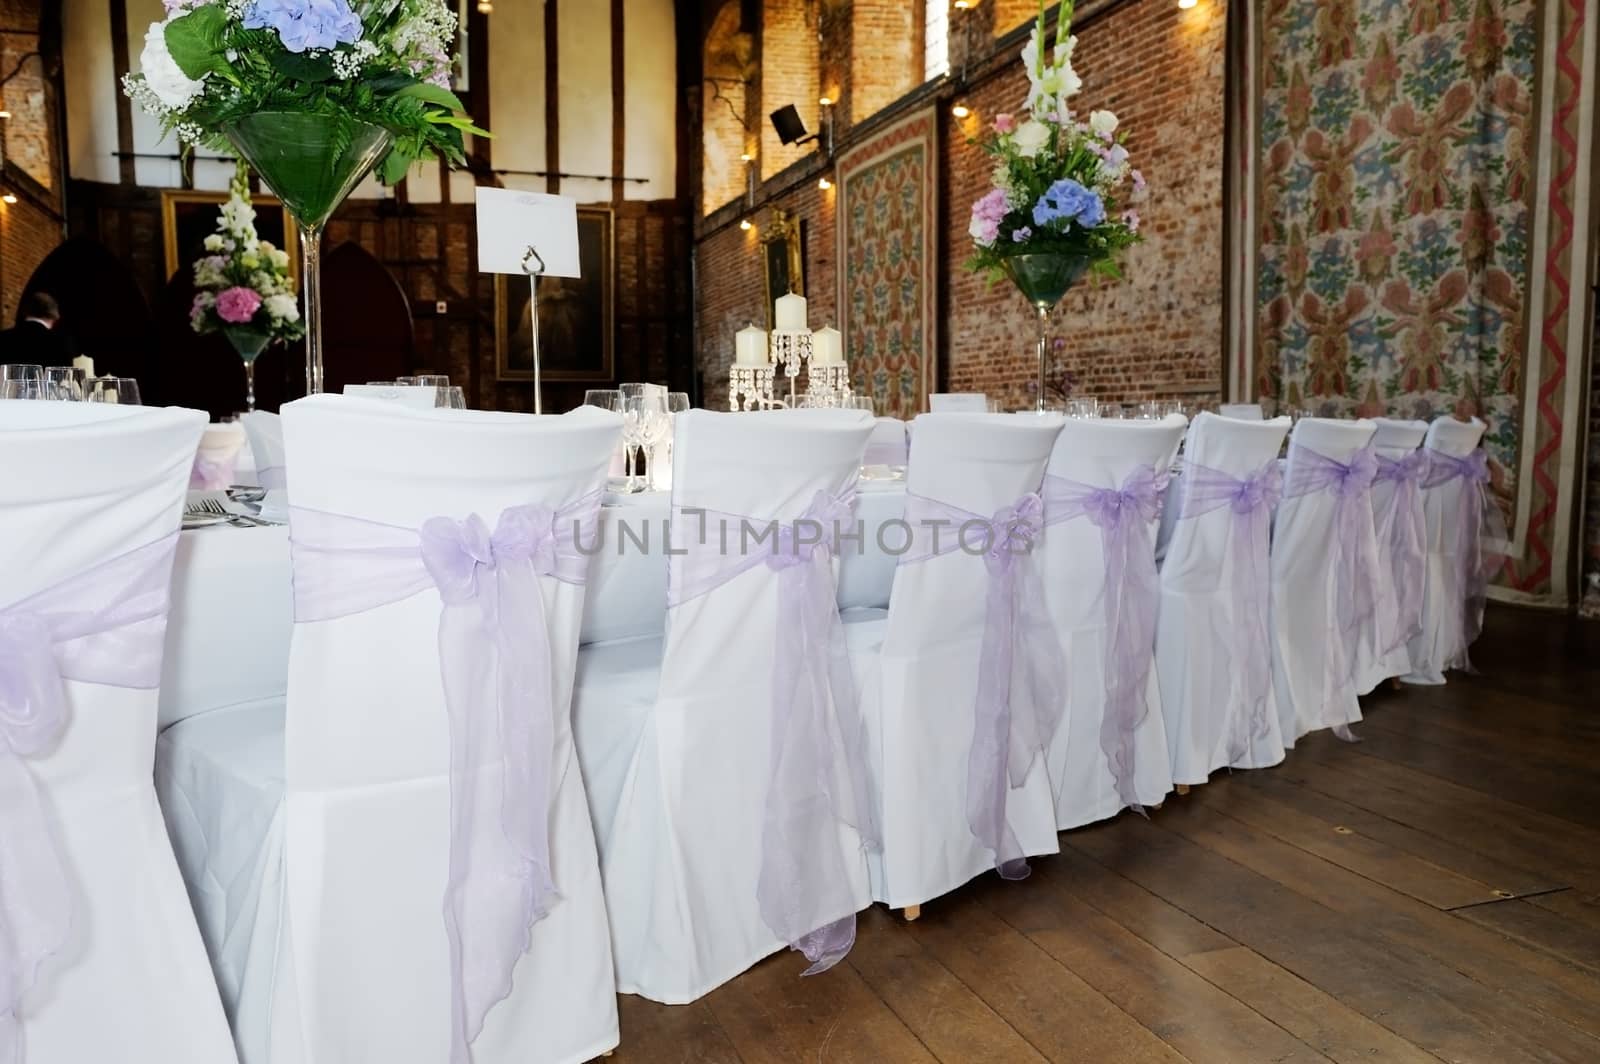 Back of chairs showing white and lilac covers at wedding reception